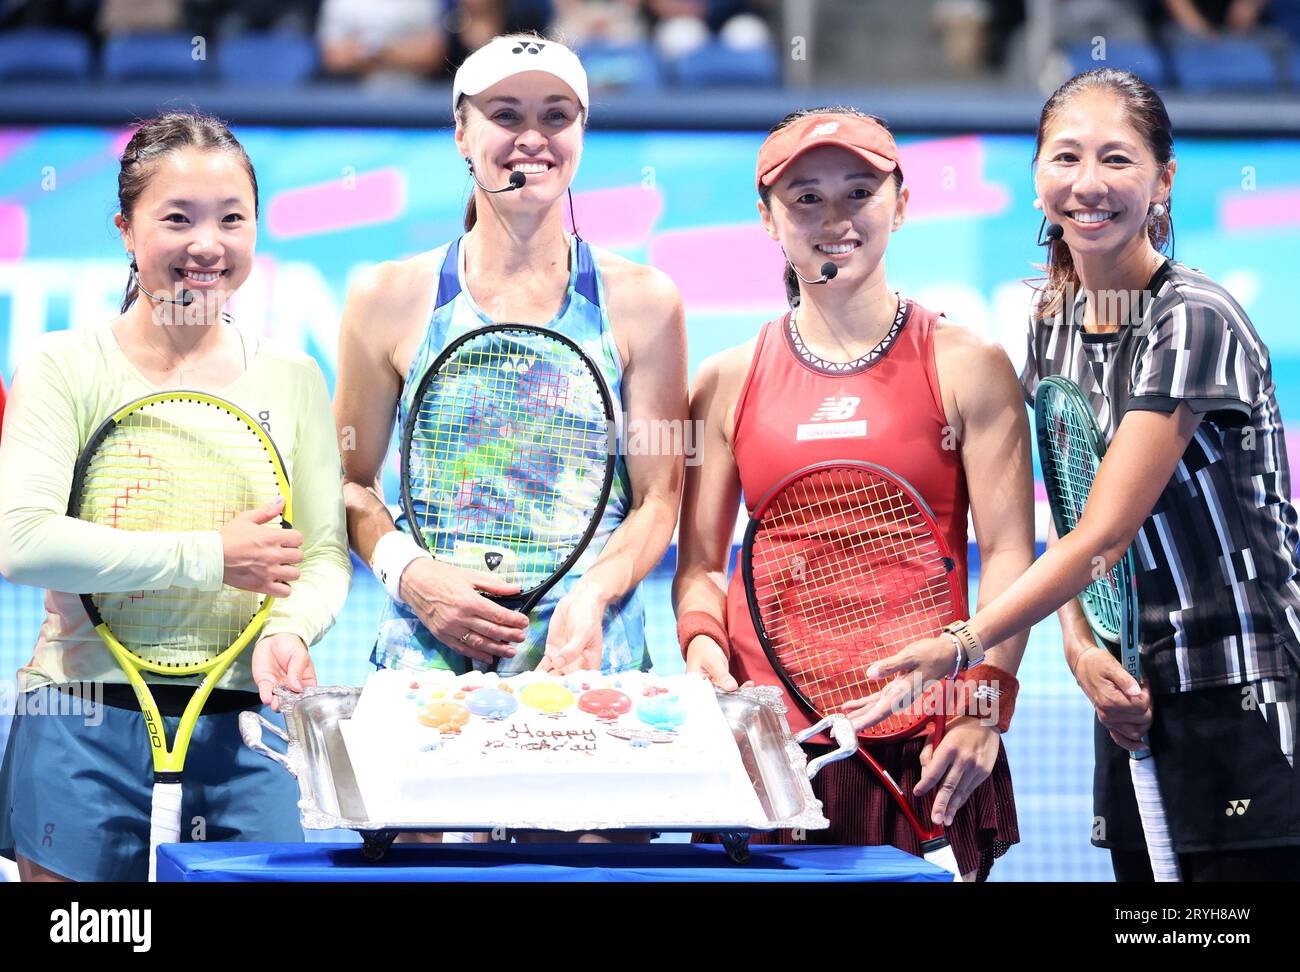 Tokyo, Japan. 1st Oct, 2023. Swiss tennis legend Martina Hingis (2nd L) is celebrated for her birtday from Japanese players Kurumi Nara (L), Misaki Doi (2nd R) and Shinobu Asagoe (R) after their doubles game for exhibition match after the final of the Toray Pan Pacifc Open tennis tournament at the Ariake Colosseum in Tokyo on Sunday, October 1, 2023. (photo by Yoshio Tsunoda/AFLO) Stock Photo